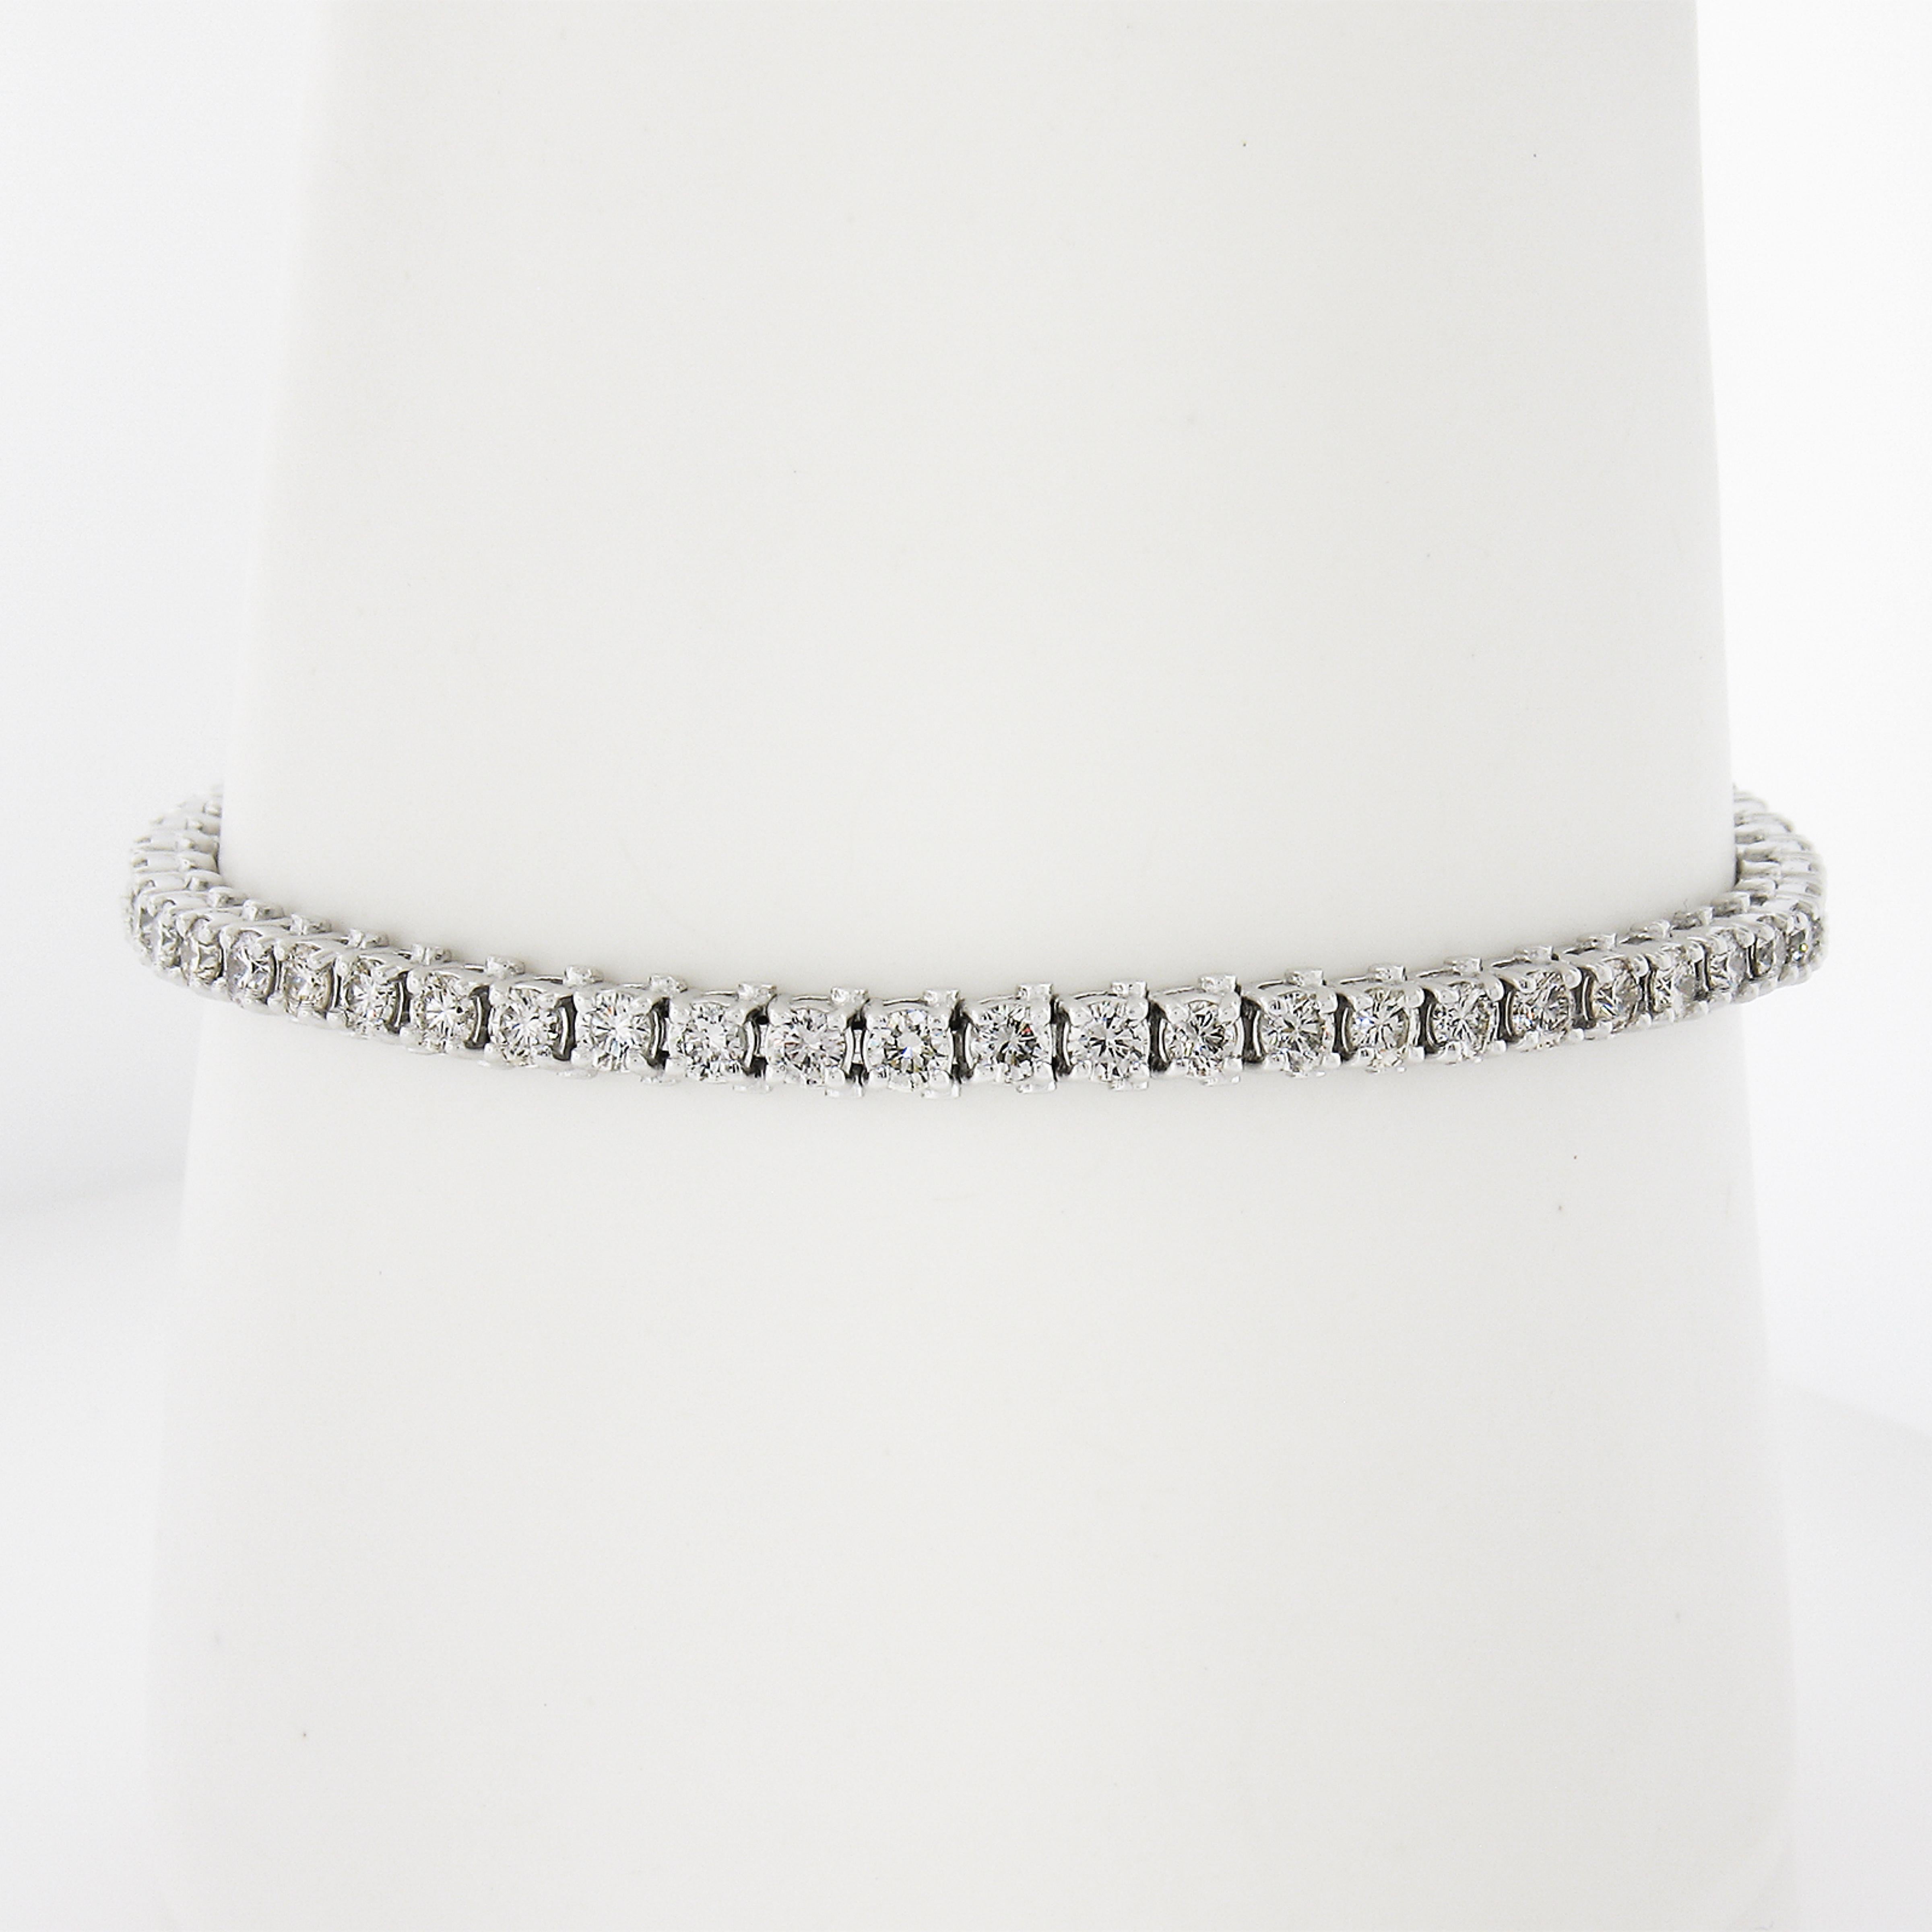 --Stone(s):--
(57) Natural Genuine Diamonds - Round Brilliant Cut - Prong Set - H-K Color - VS2-SI2 Clarity
Total Carat Weight: 3.90 (approx.)

Material: Solid 14K White Gold
Weight: 12.5 Grams
Type: Tennis Line Link
Chain Length: Measures 7 Inches